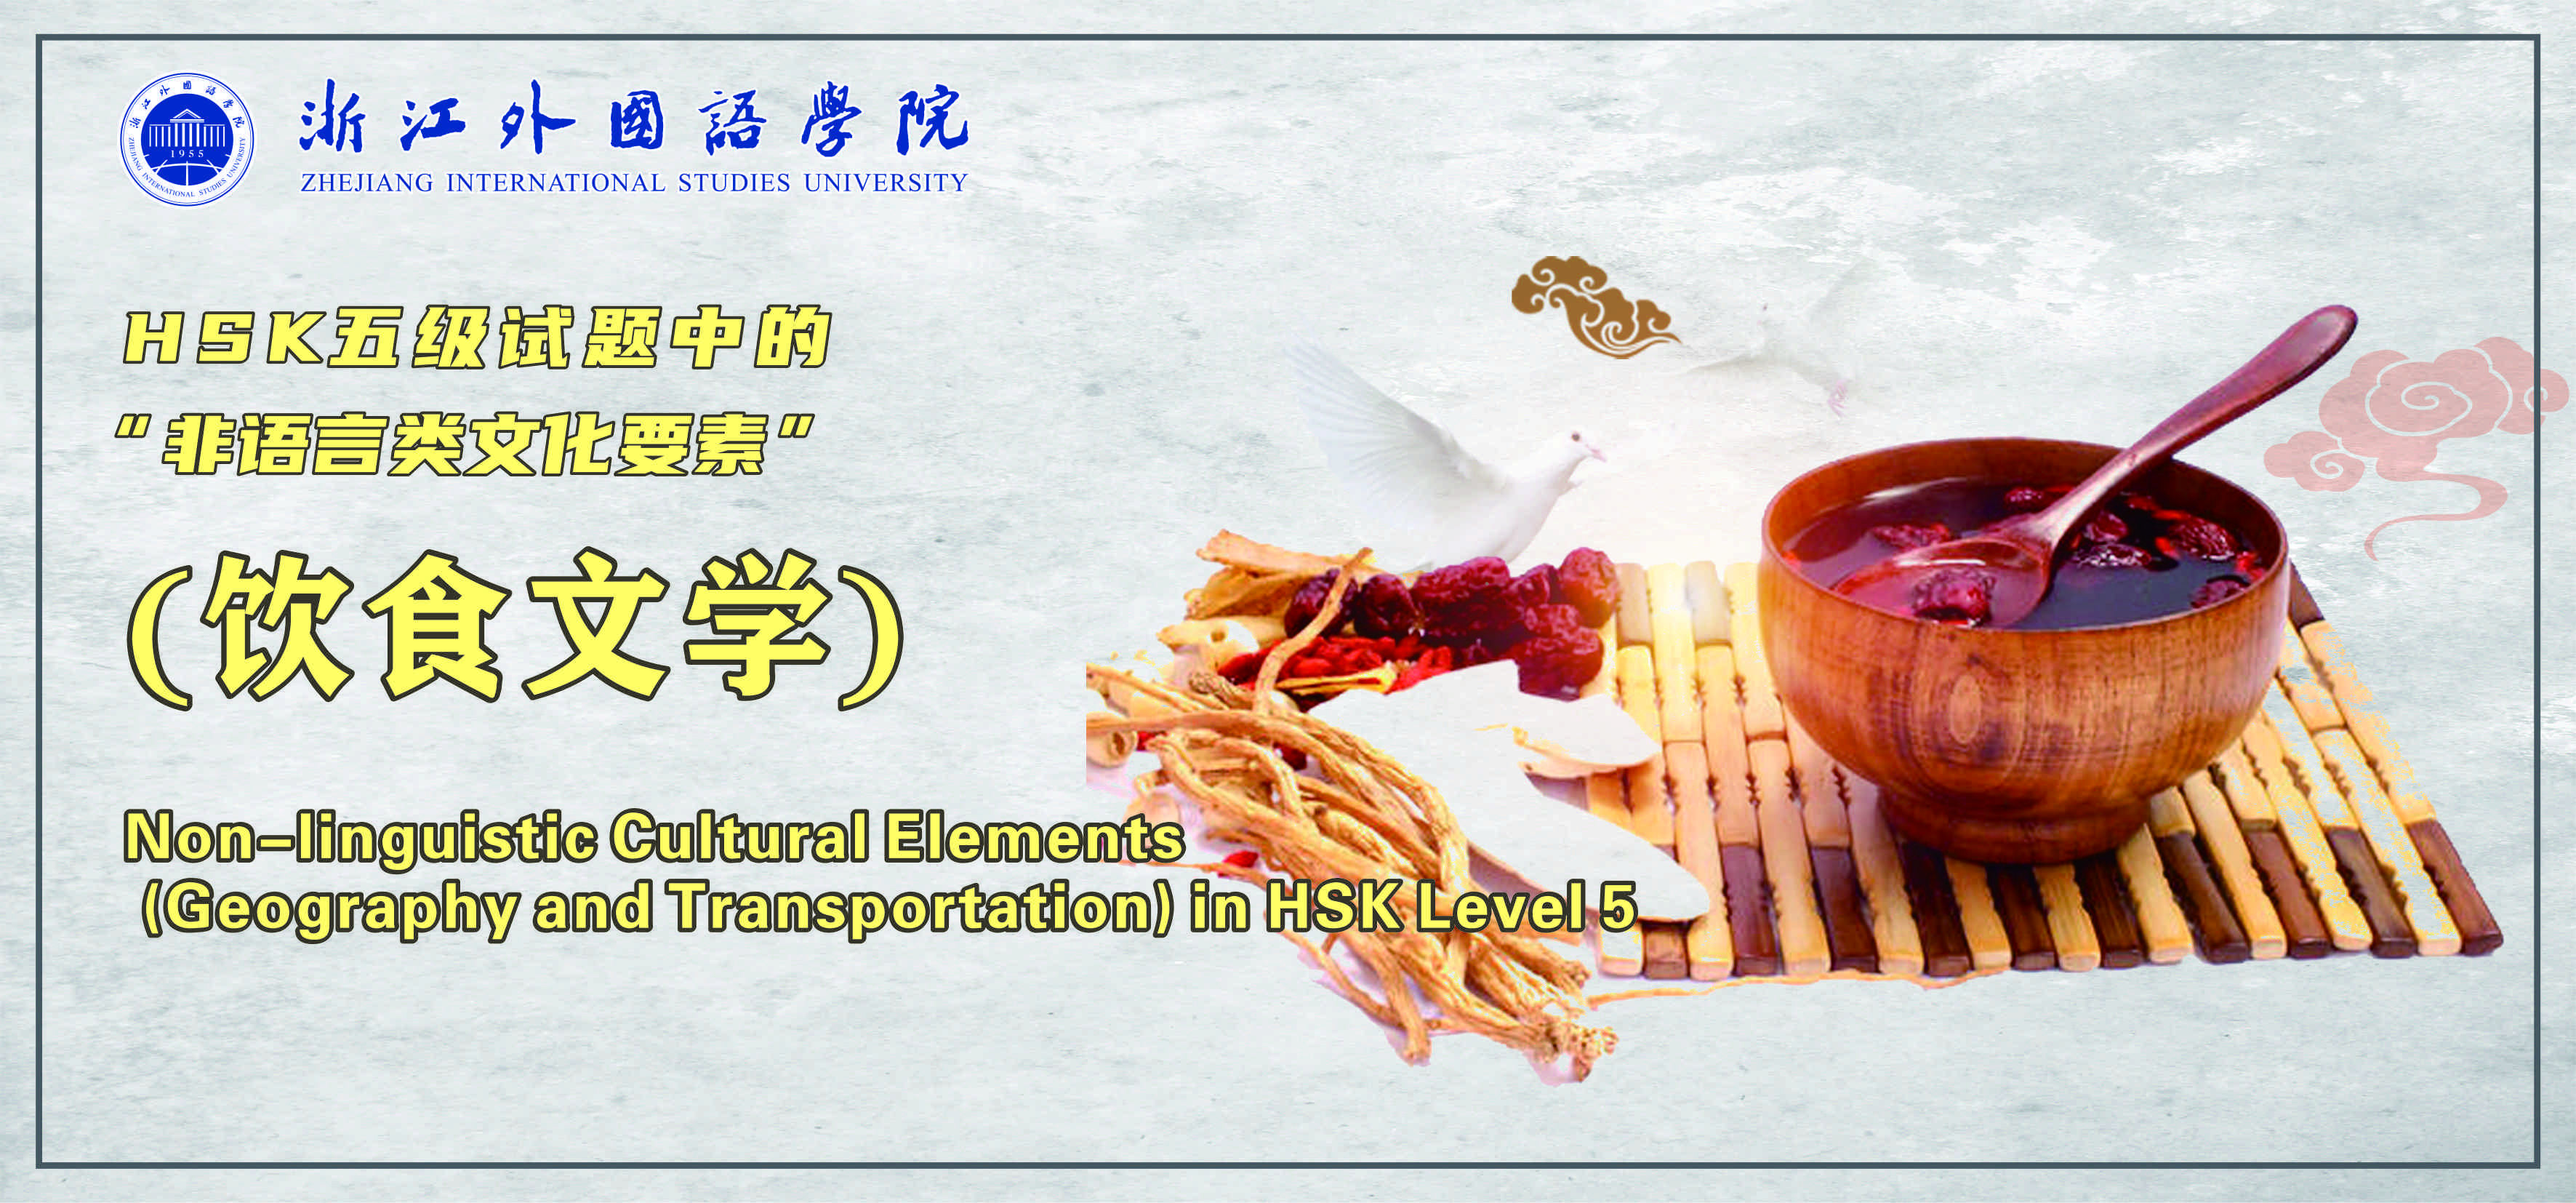 Non-linguistic Cultural Elements (Food and Literature) in HSK Level 5